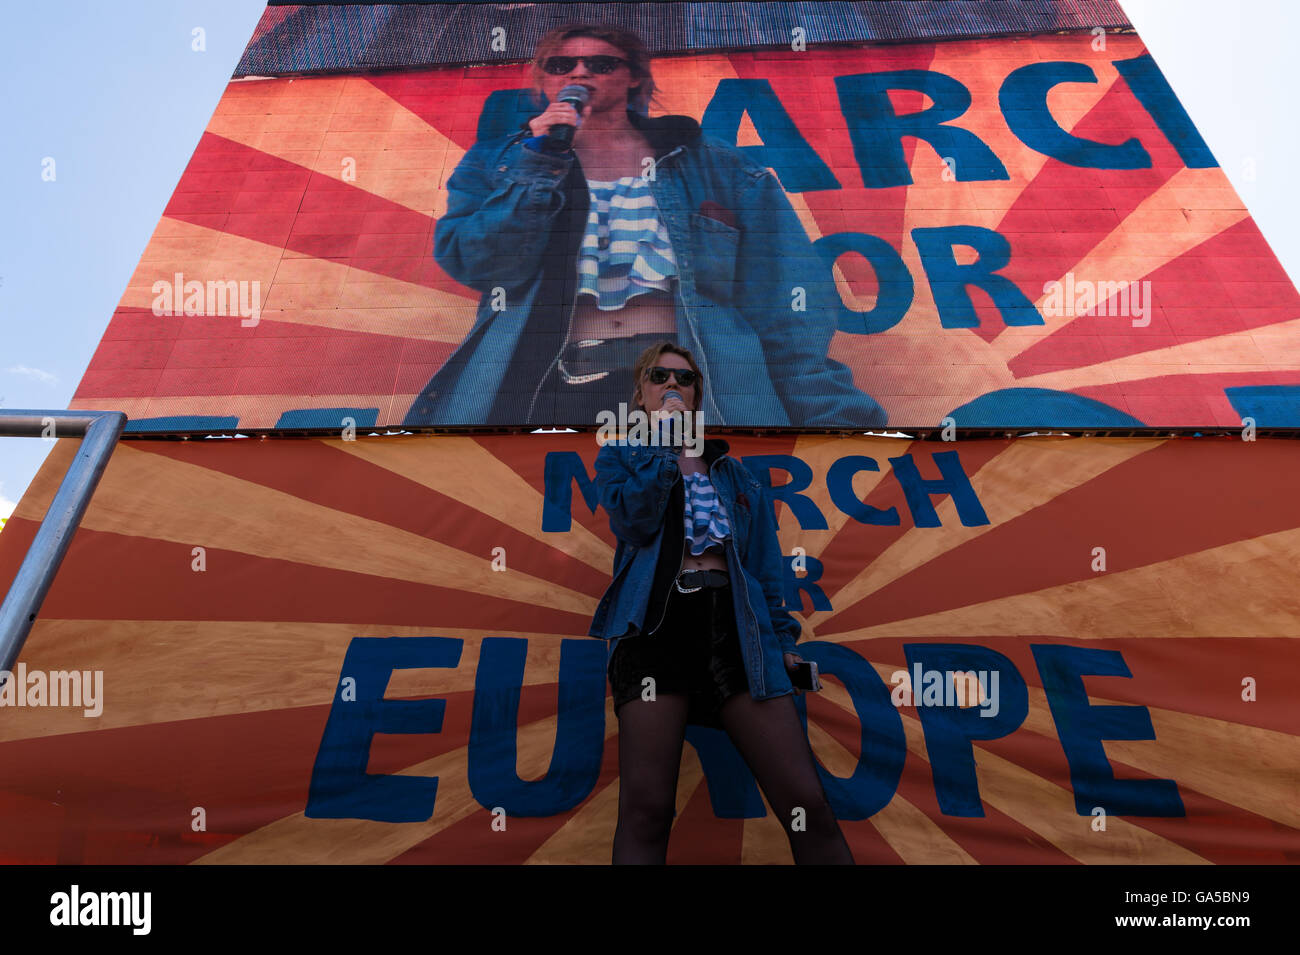 London, UK. 2nd July 2016. Billie JD Porter speaks to the crowd gathered at Parliament Square during March for Europe rally. Wiktor Szymanowicz/Alamy Live News Stock Photo